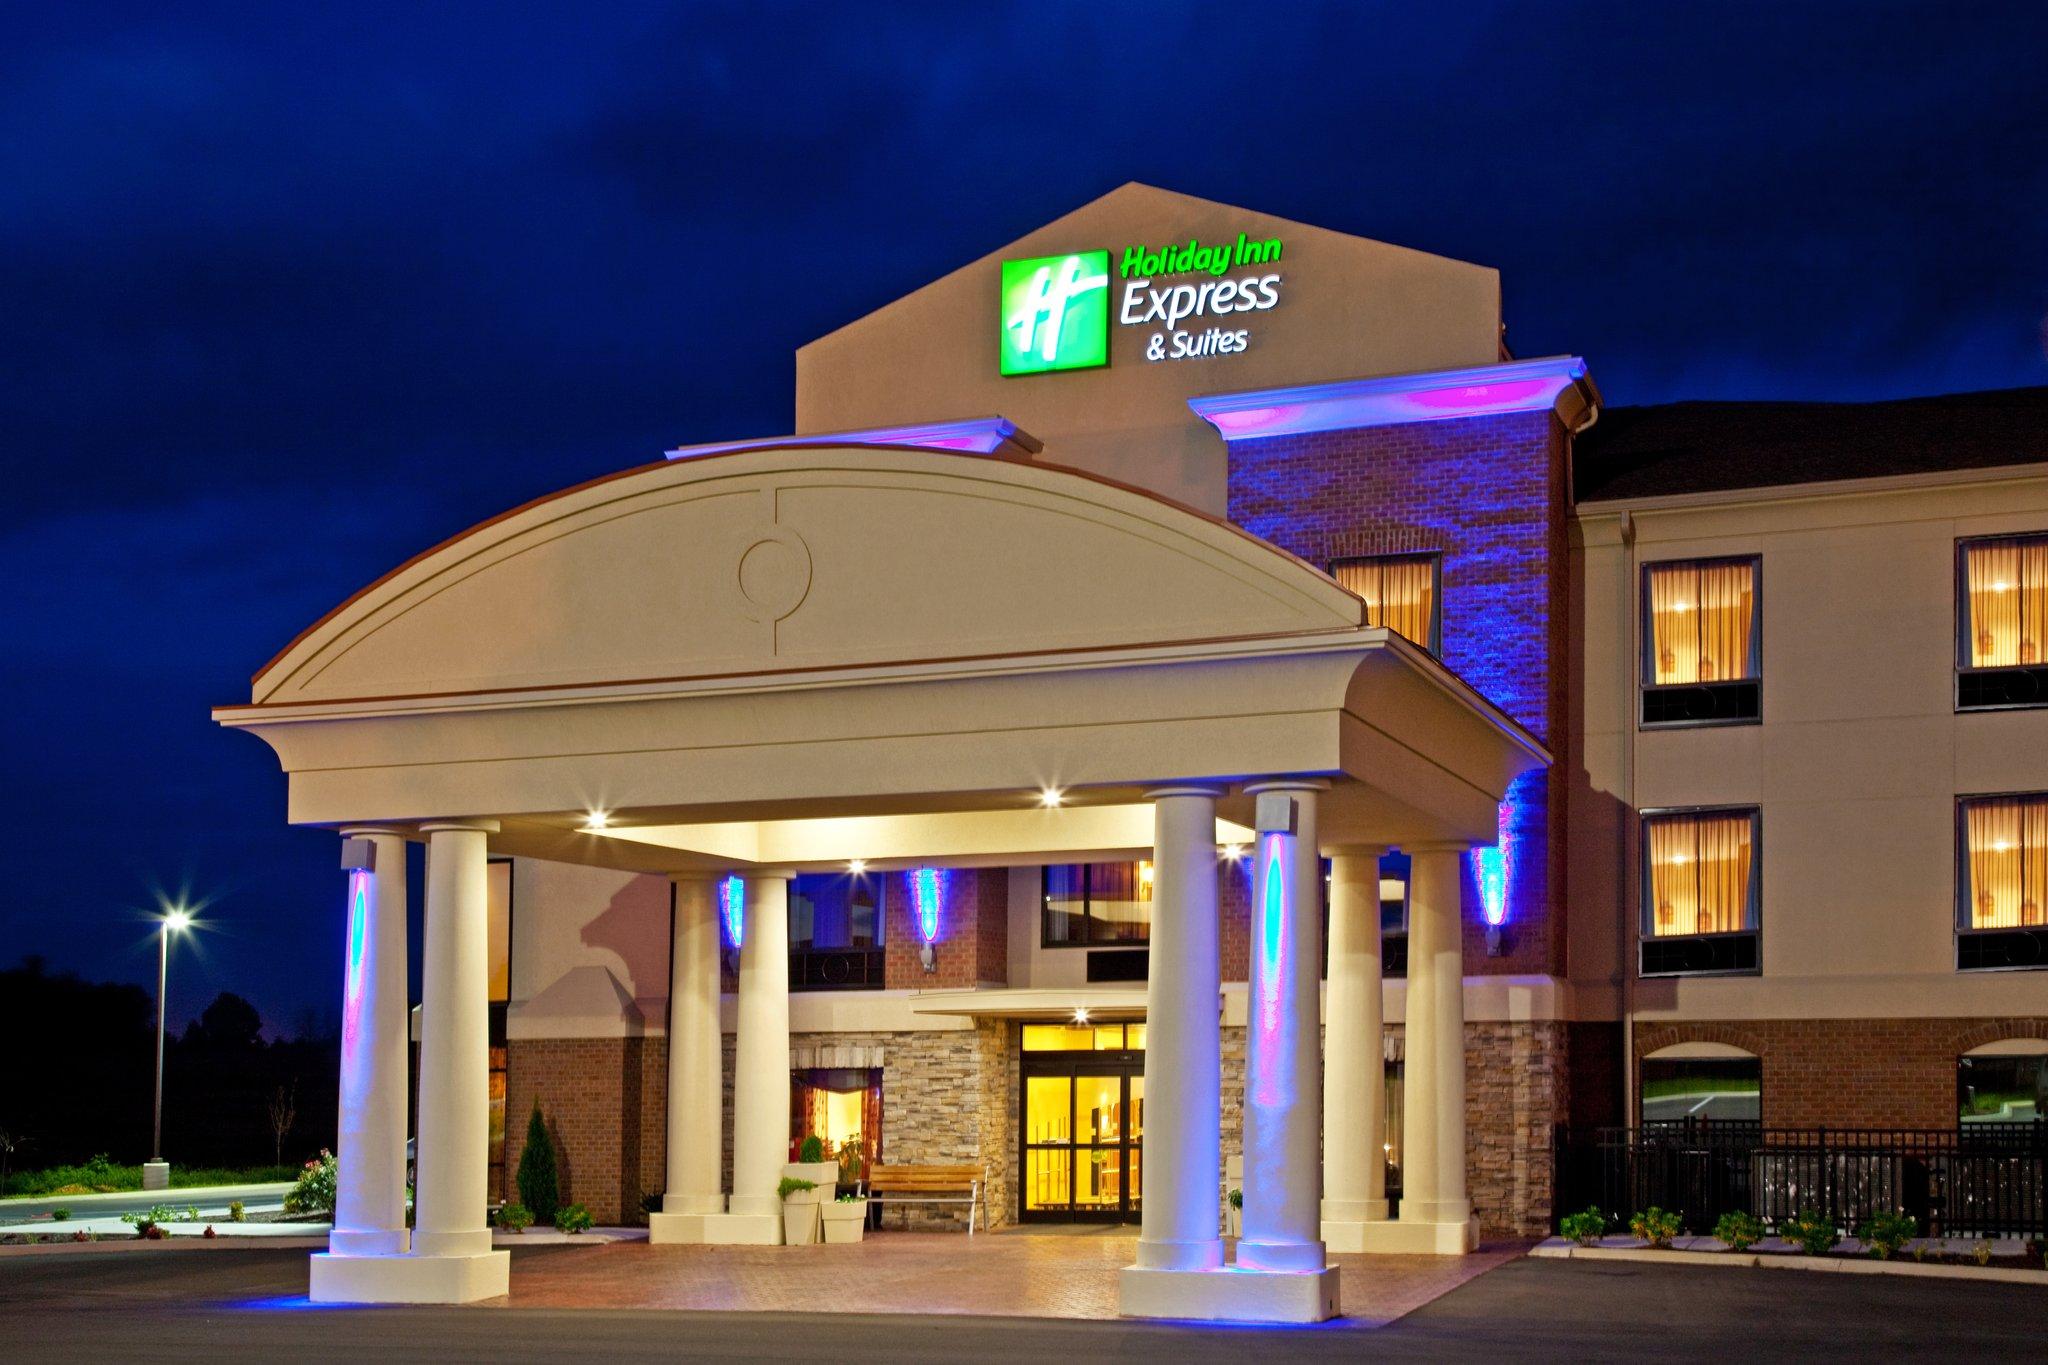 Holiday Inn Express Hotel & Suites Franklin in Franklin, KY